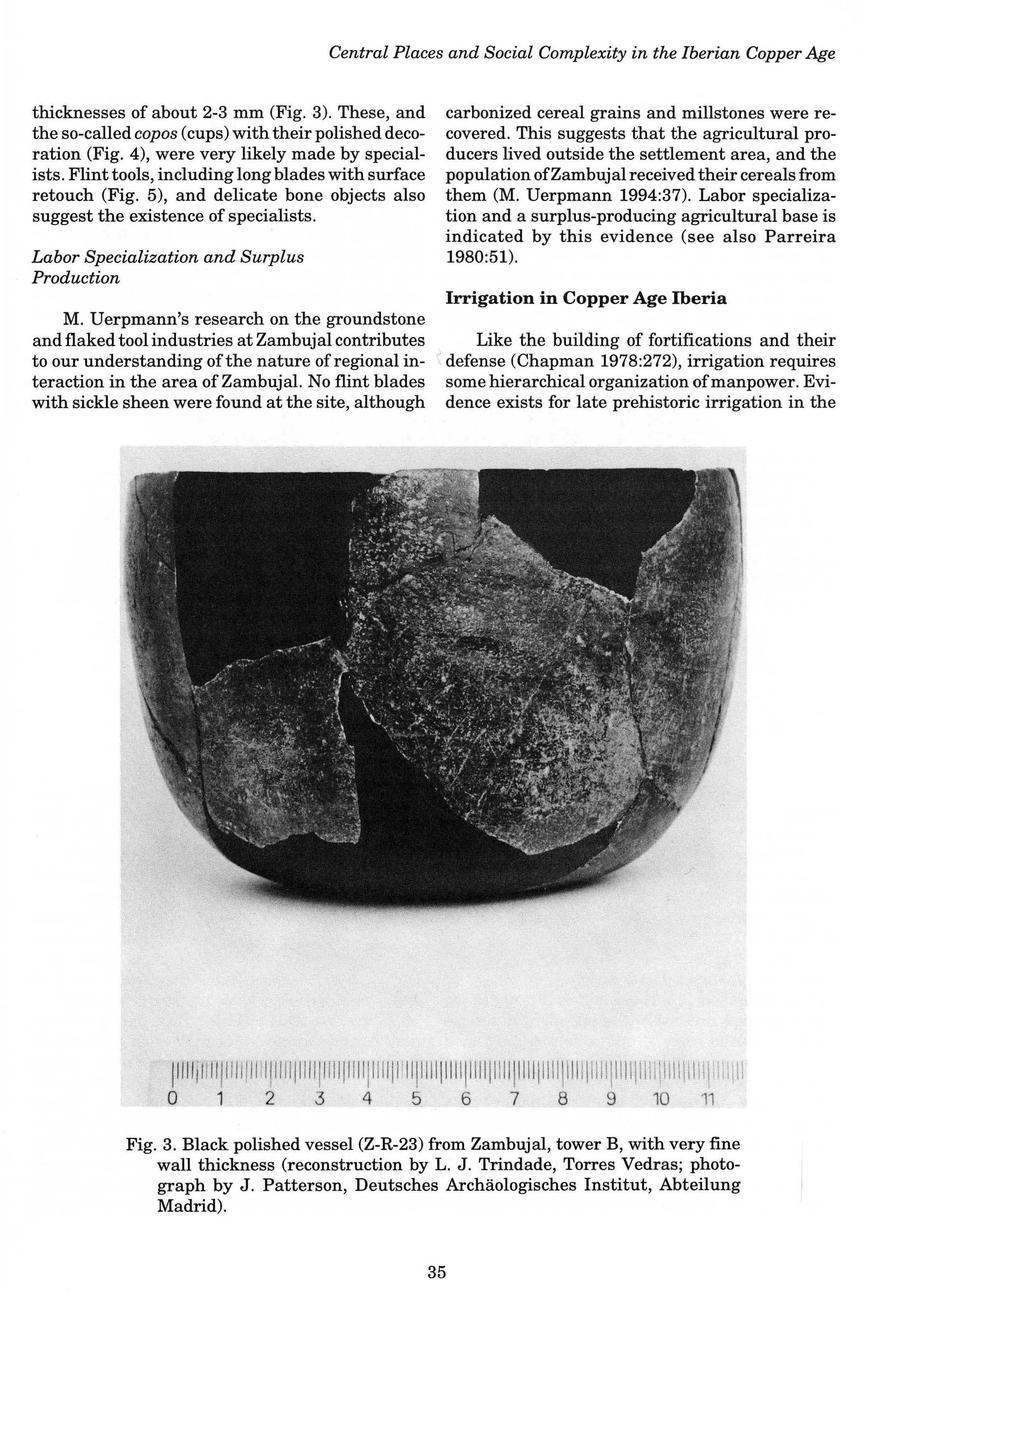 Central Places and Social Complexity in the Iberian Copper Age thicknesses of about 2-3 mm (Fig. 3). These, and the so-called copos (cups) with their polished decoration (Fig.